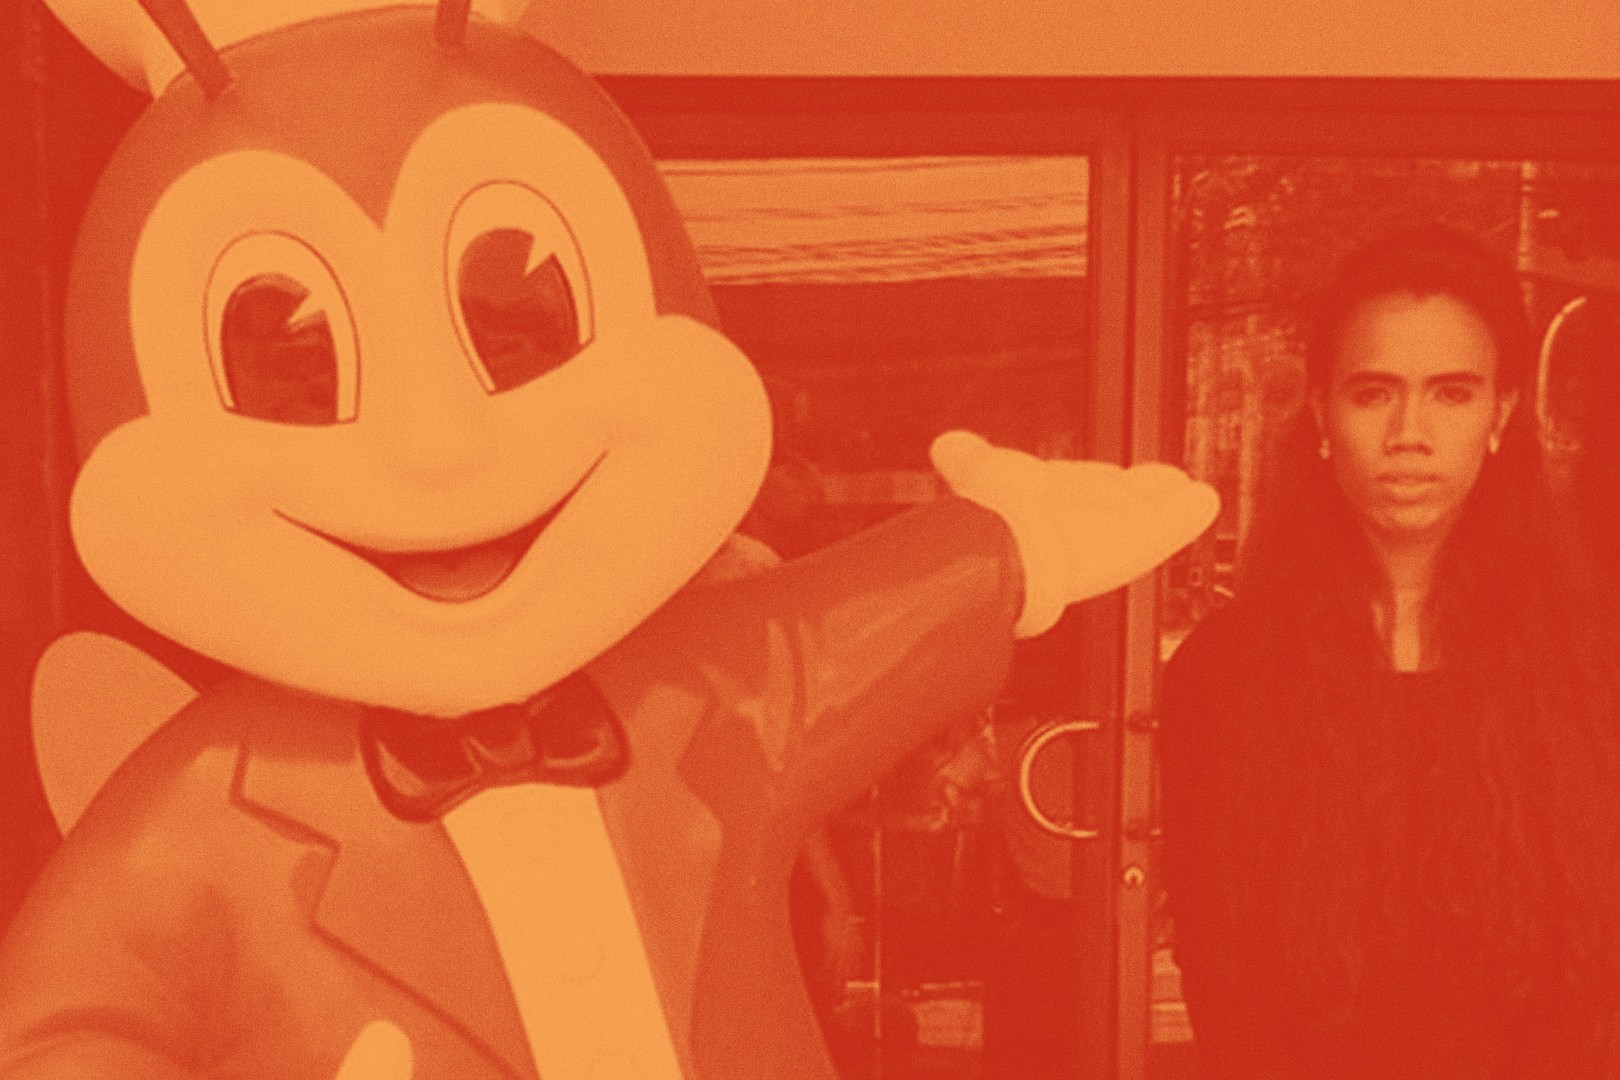 An image of a Jollibee statue pointing at Bunny Carandag, awash in orange.